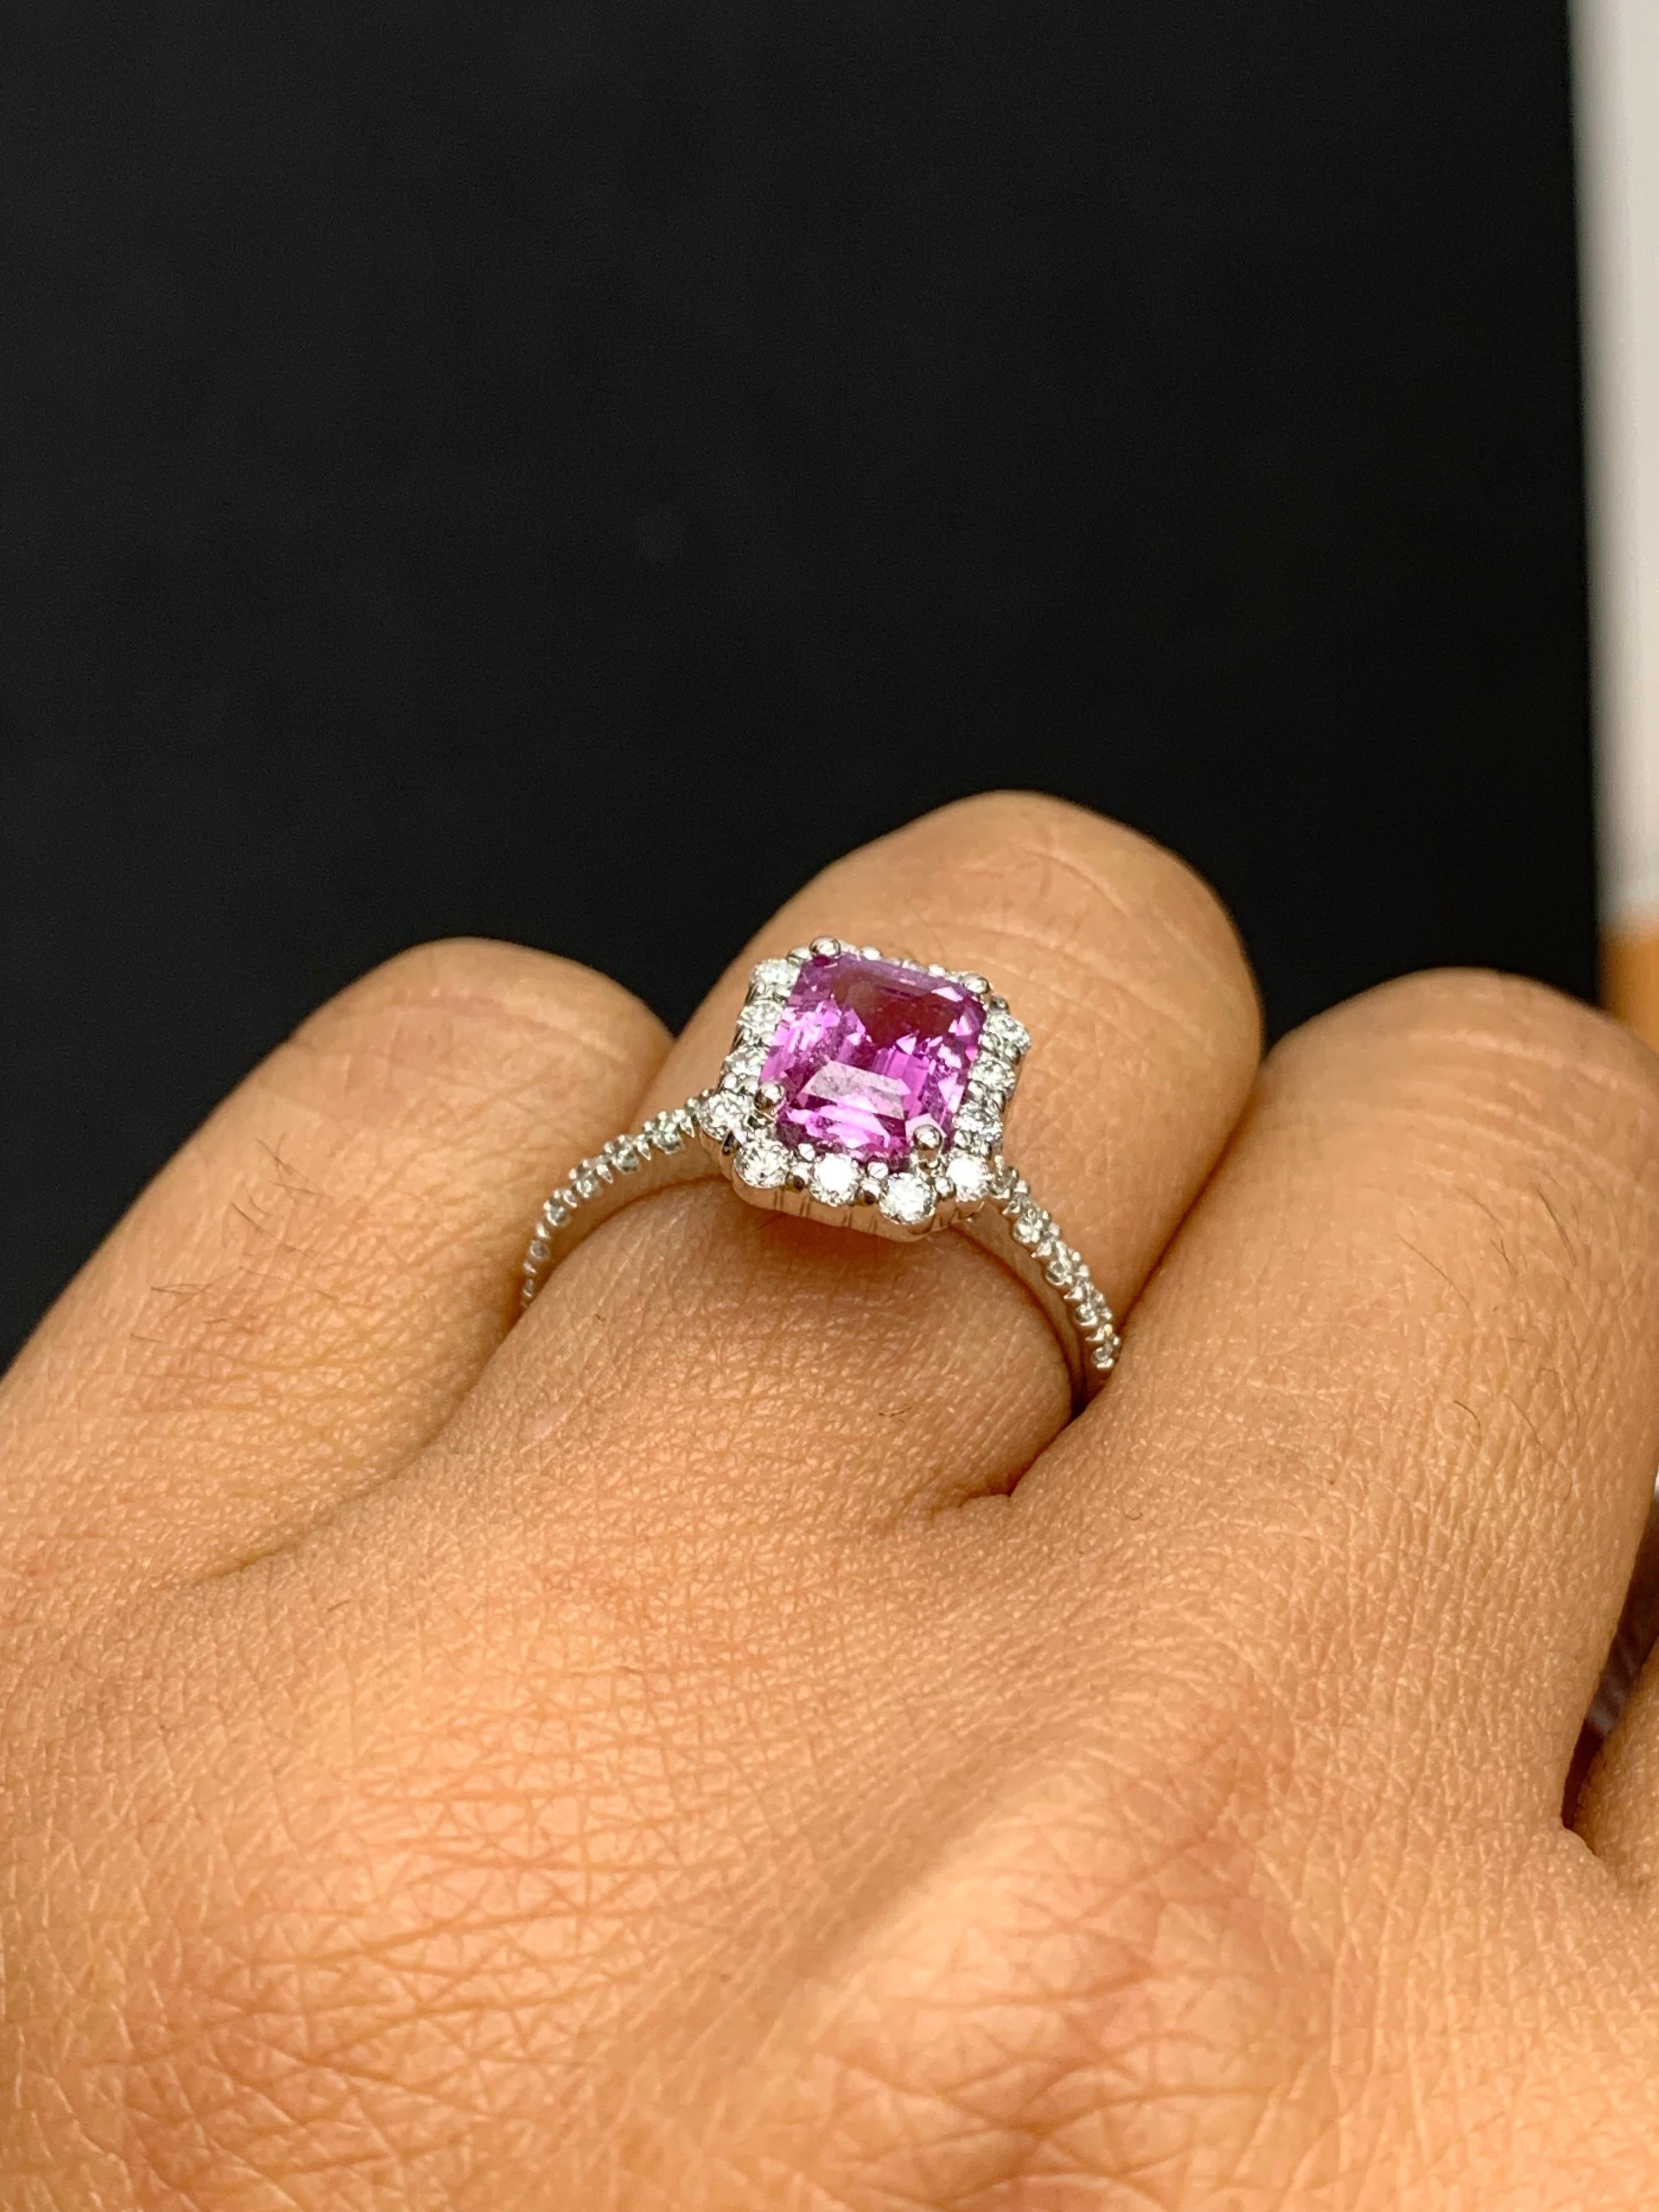 Women's 1.59 Carat Emerald Cut Pink Sapphire Diamond Engagement Ring in 14K White Gold For Sale